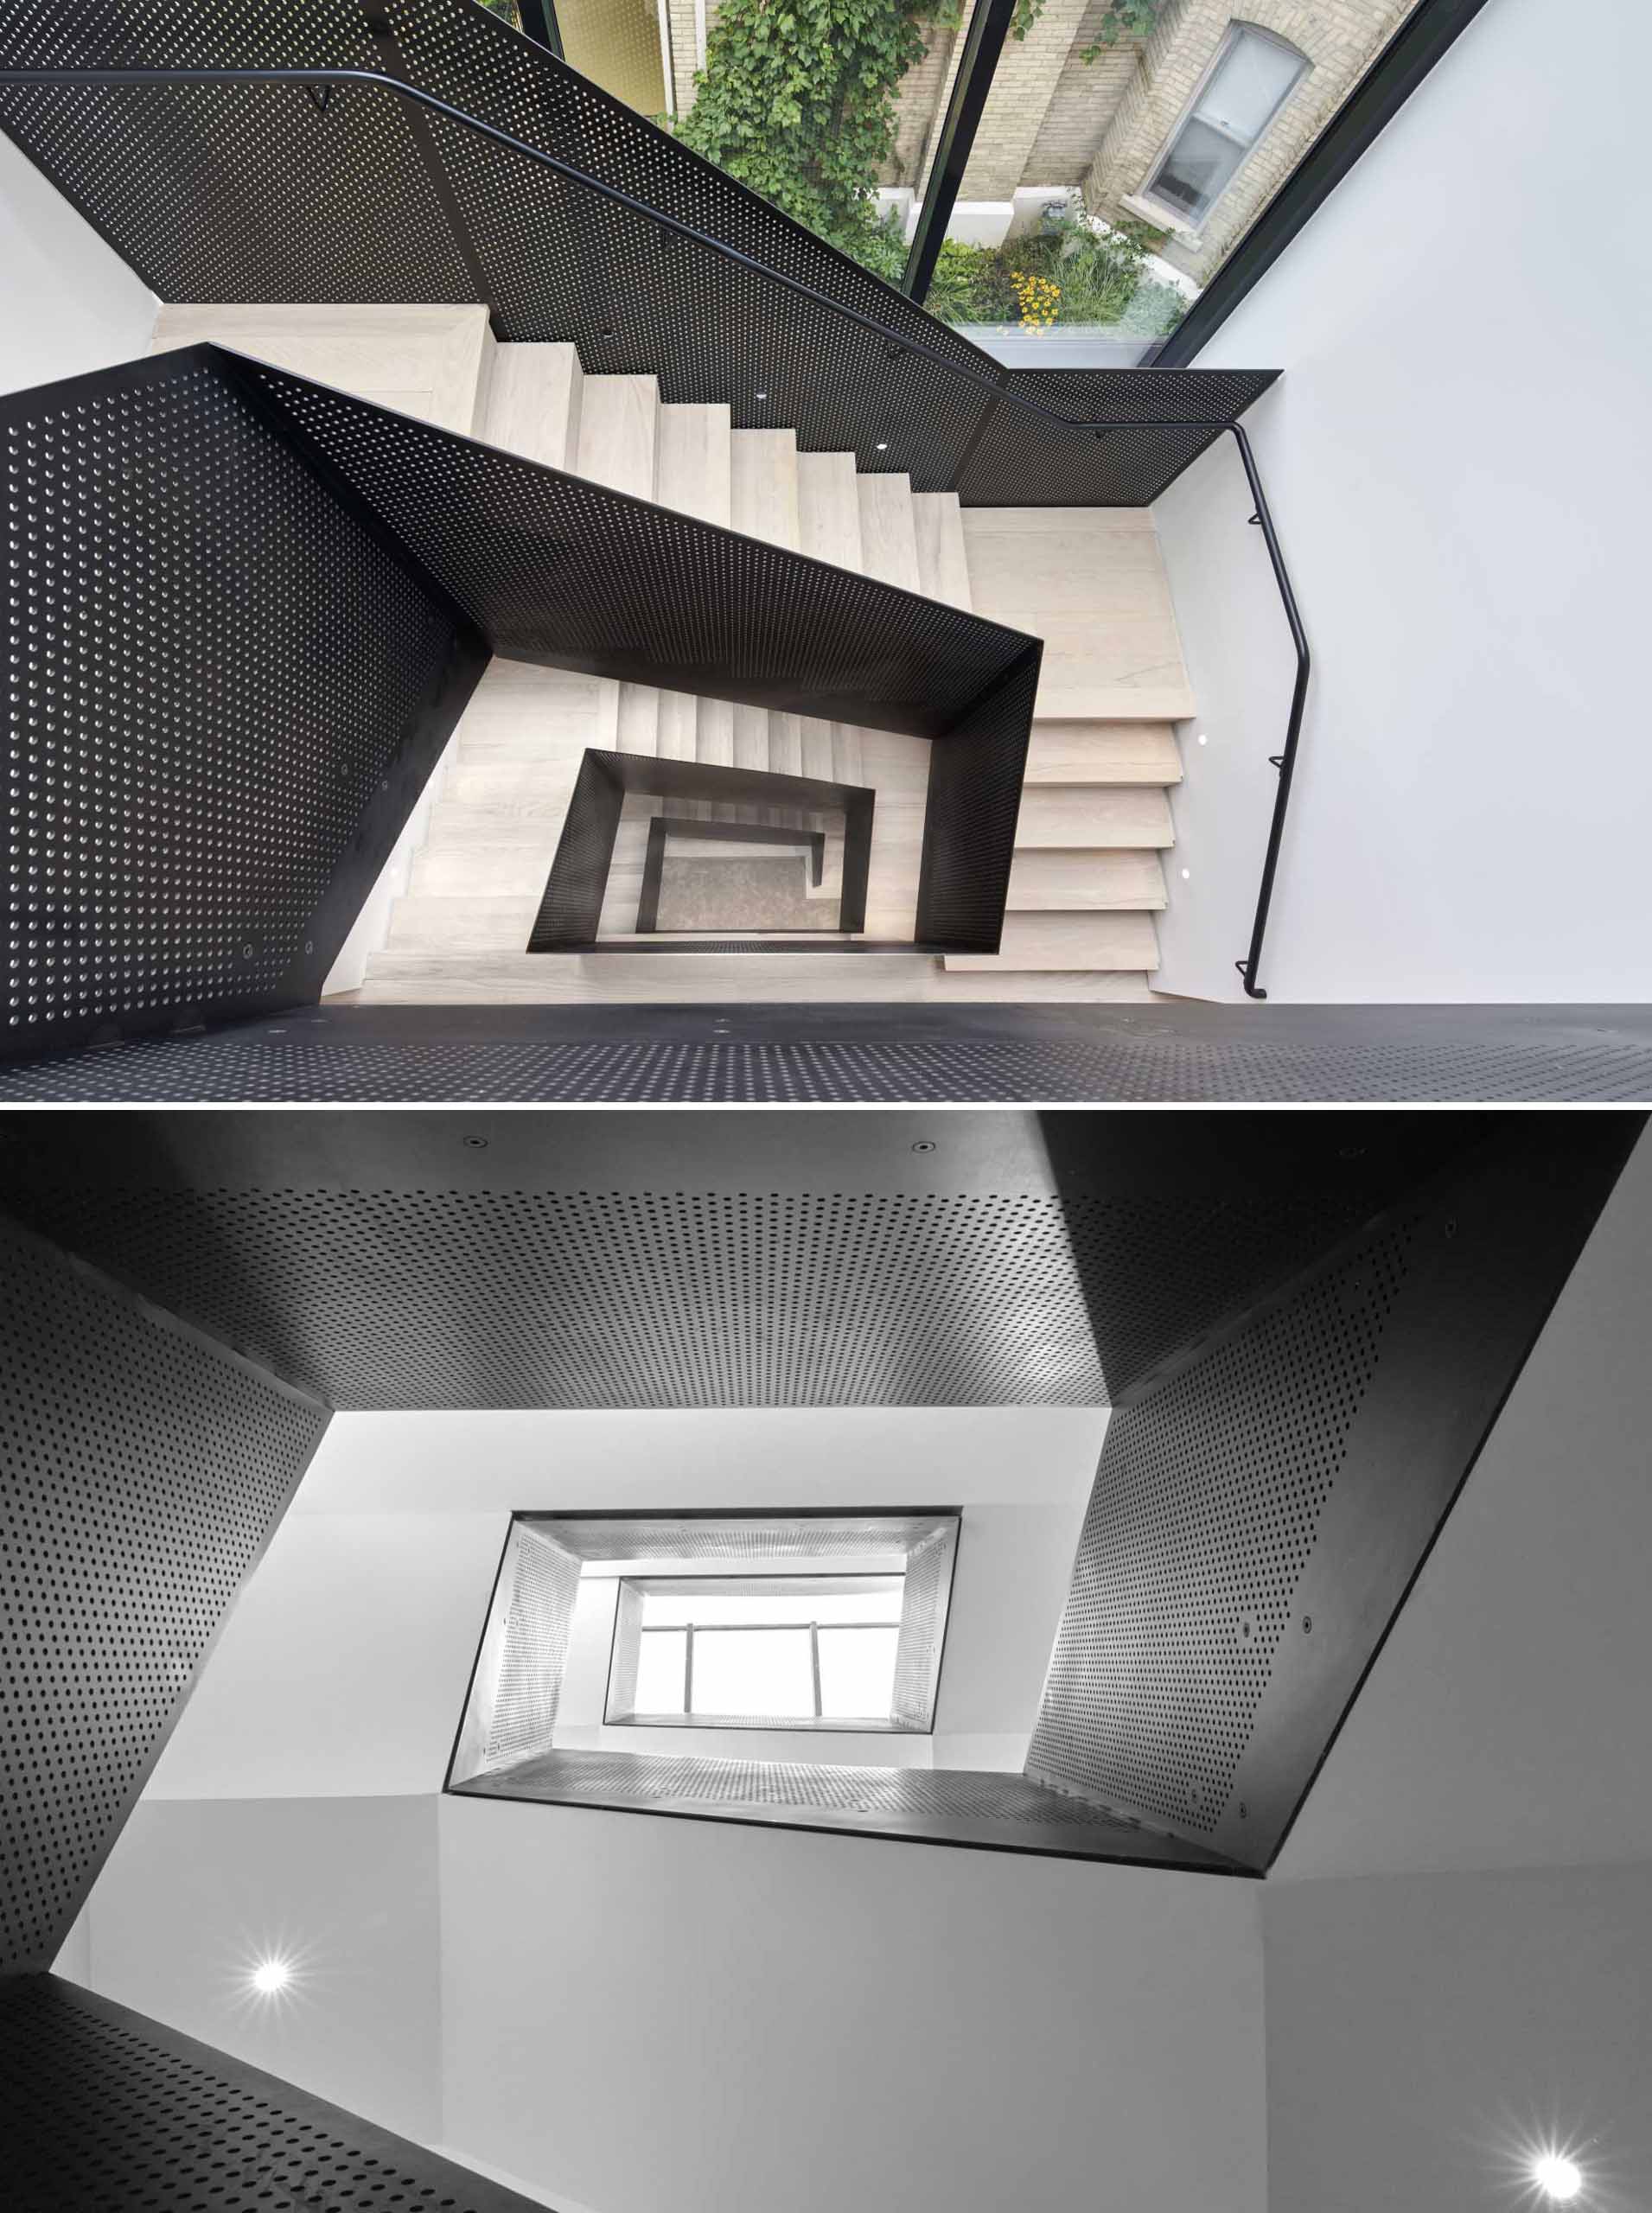 Wood stairs with perforated black metal railings connect the multiple levels of the home 